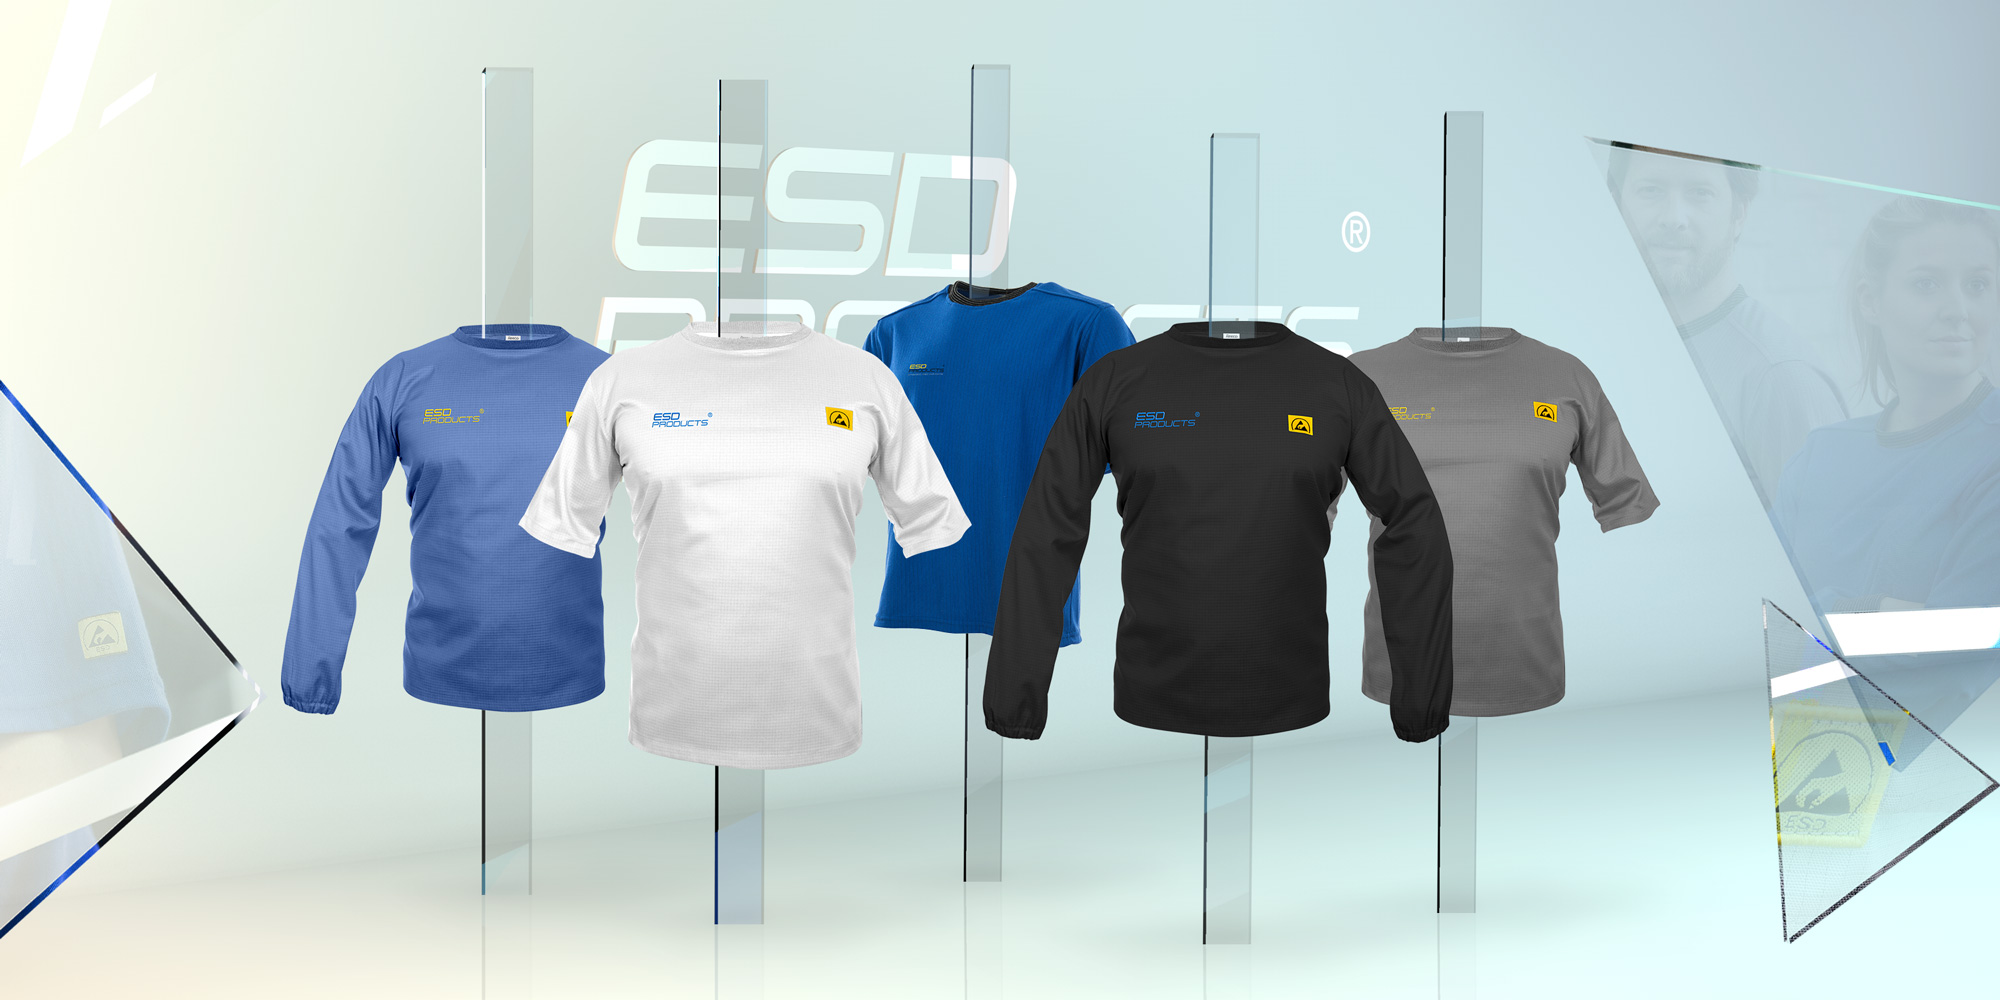 Aes_ESD-Clothing-anti-Static-Garments-T-Shirts-ESD-Static-safe-Apparel-esd_products